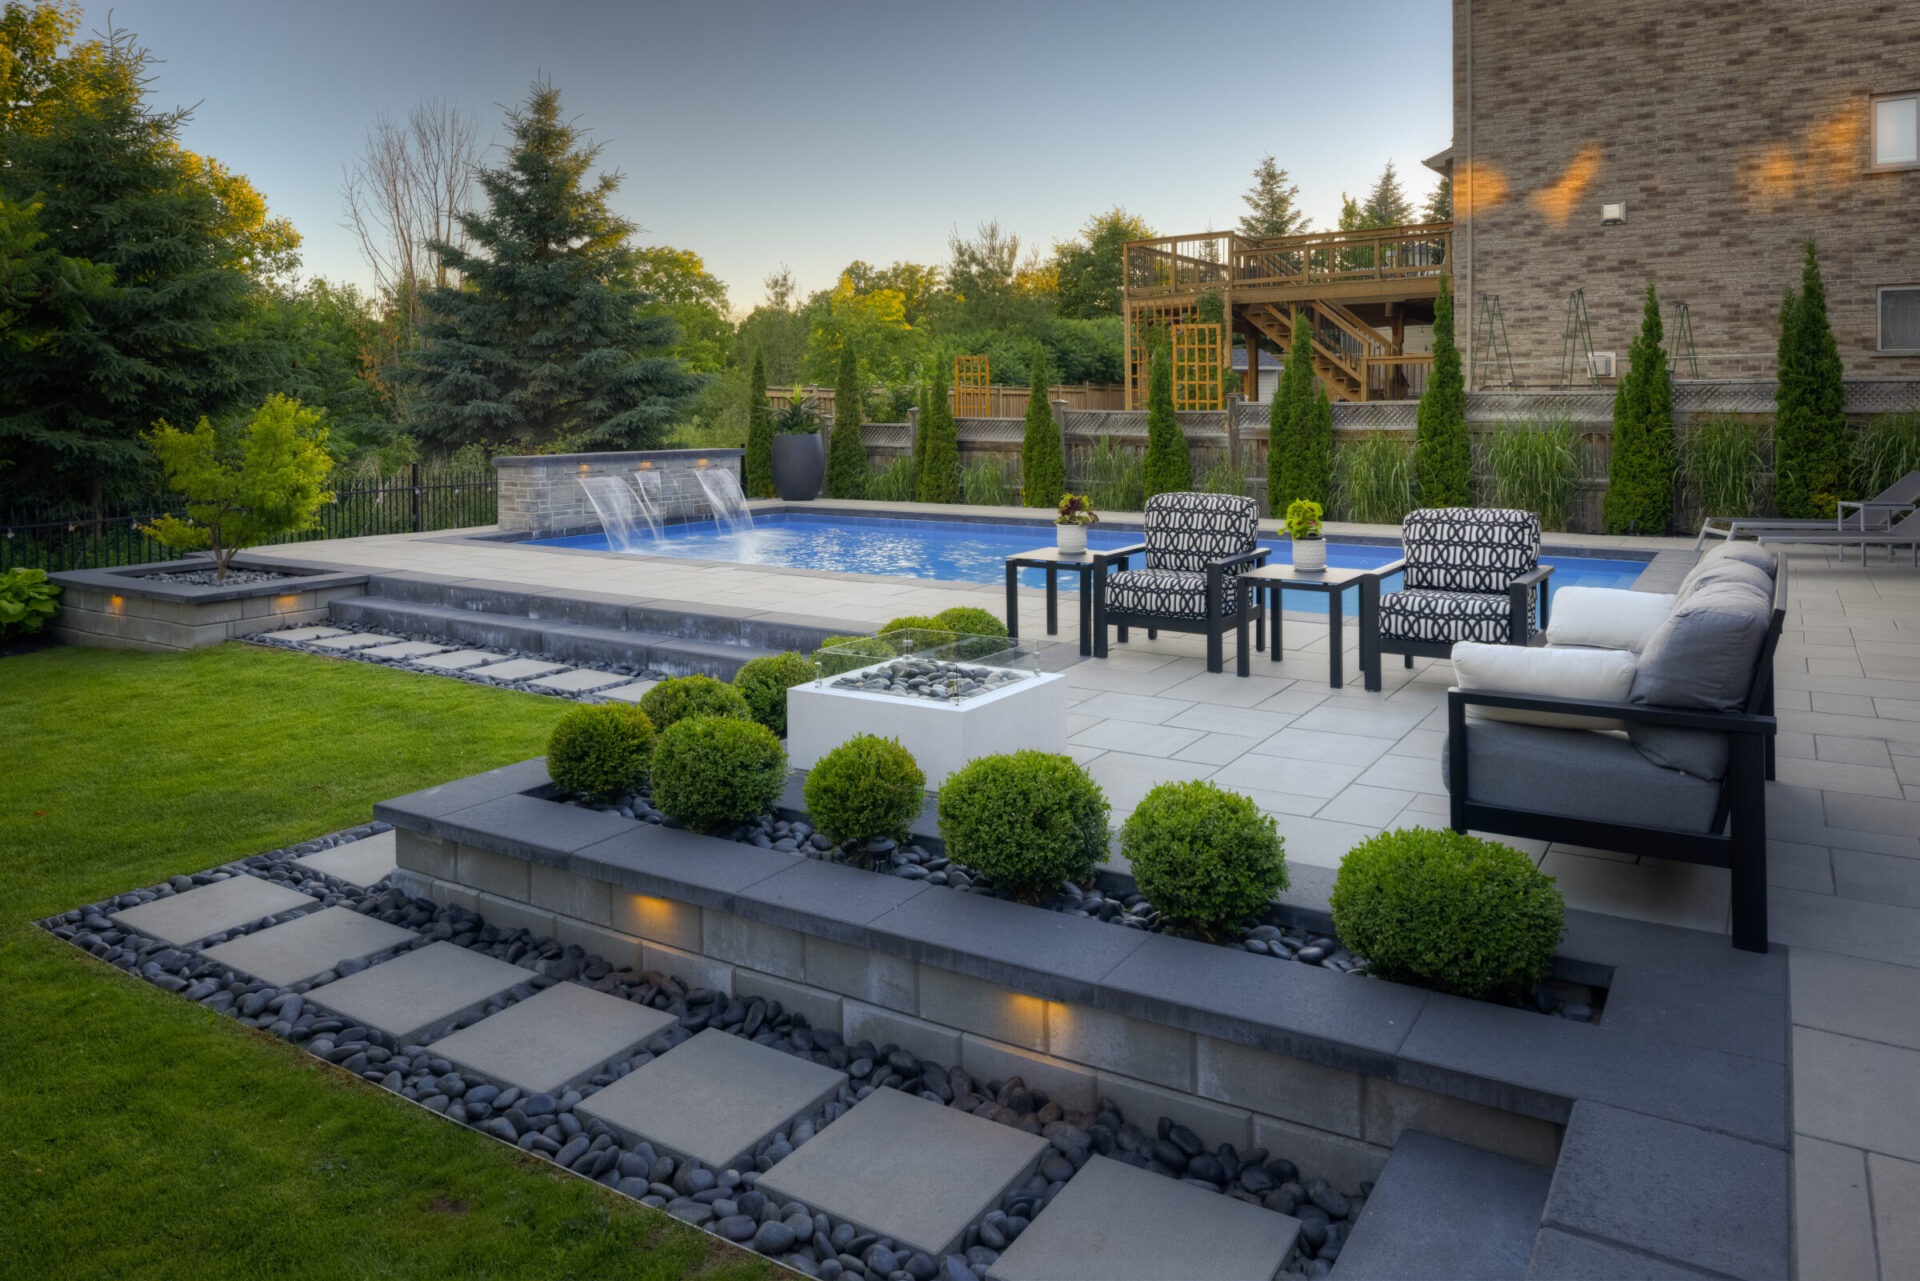 An elegantly landscaped backyard with a swimming pool, water features, patio furniture, and a wooden deck surrounded by trees during the late afternoon.